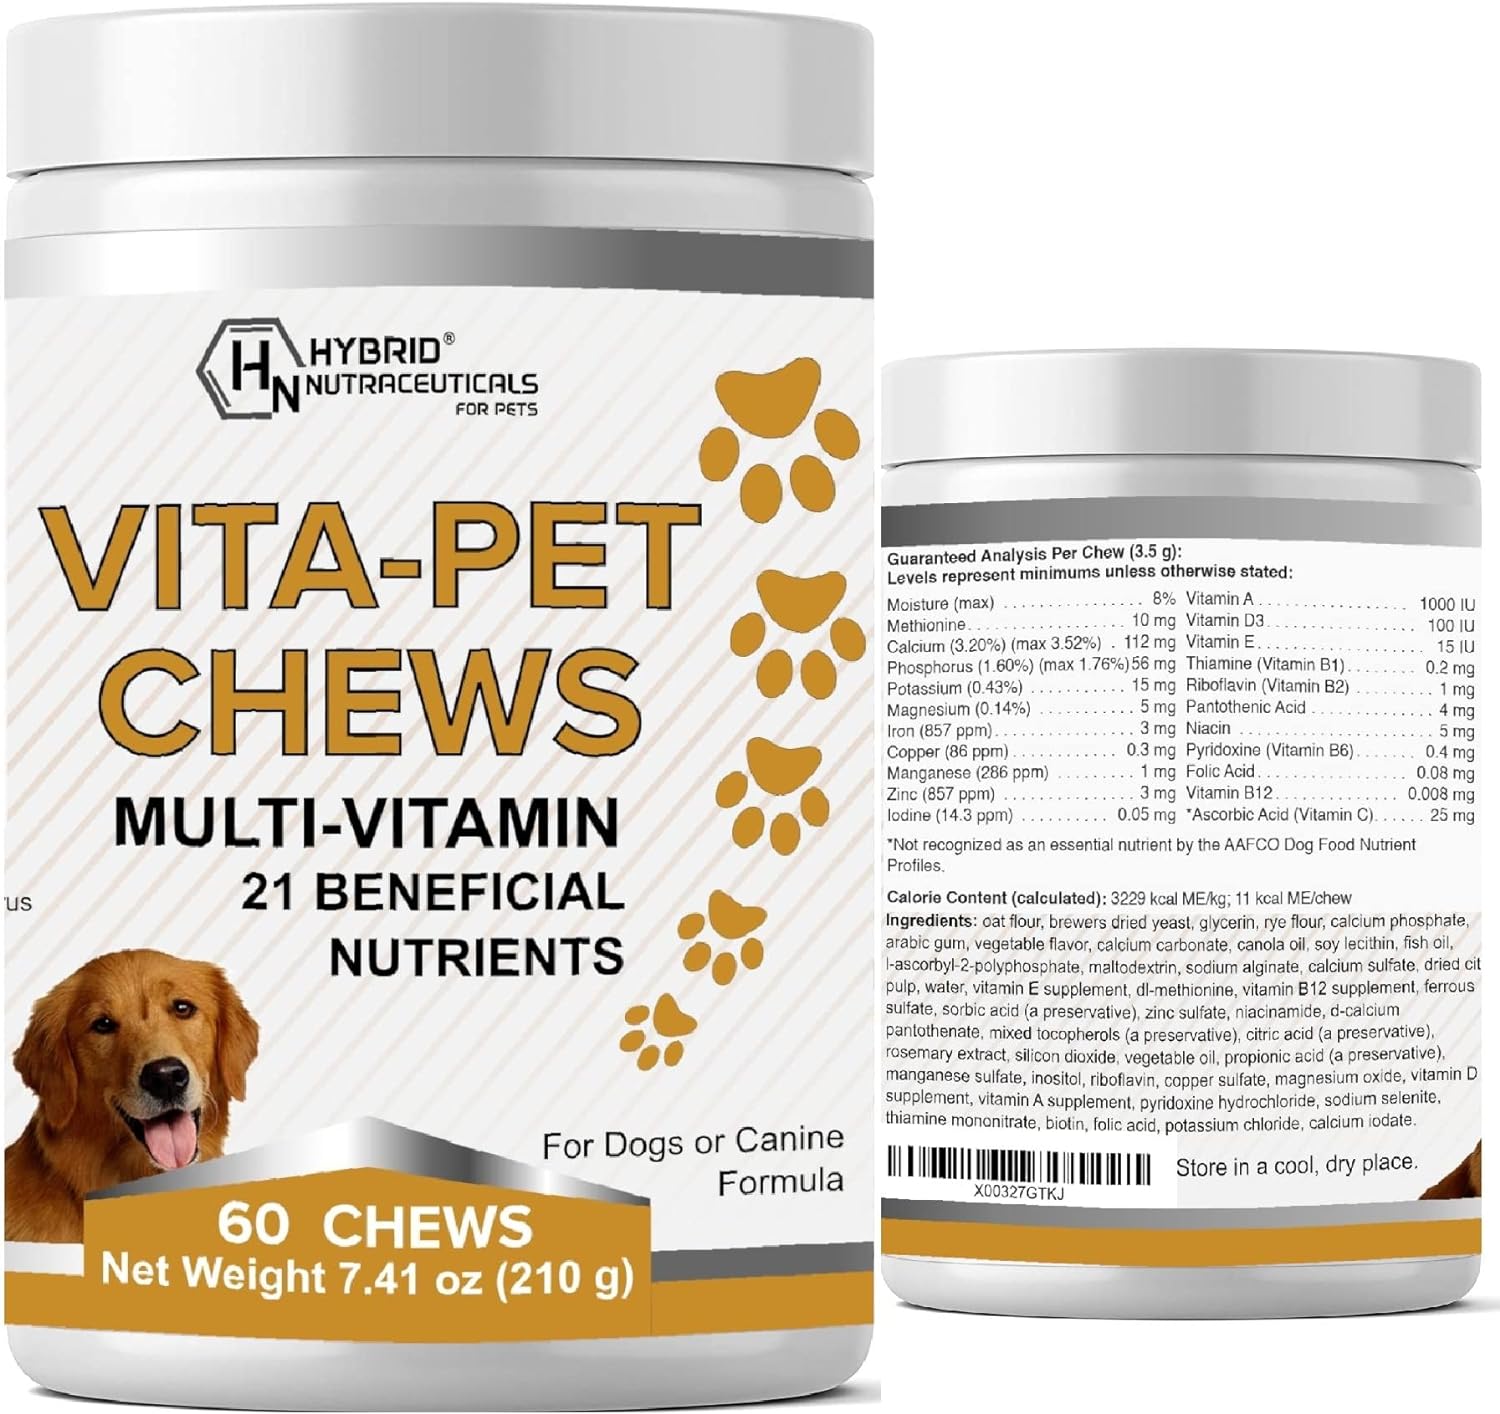 Vita-Pet Dog MultiVitamins Chewable - 21 in 1 Daily Vitamin & Mineral with EPA, DHA, Antioxidants - Support Dog's Immune